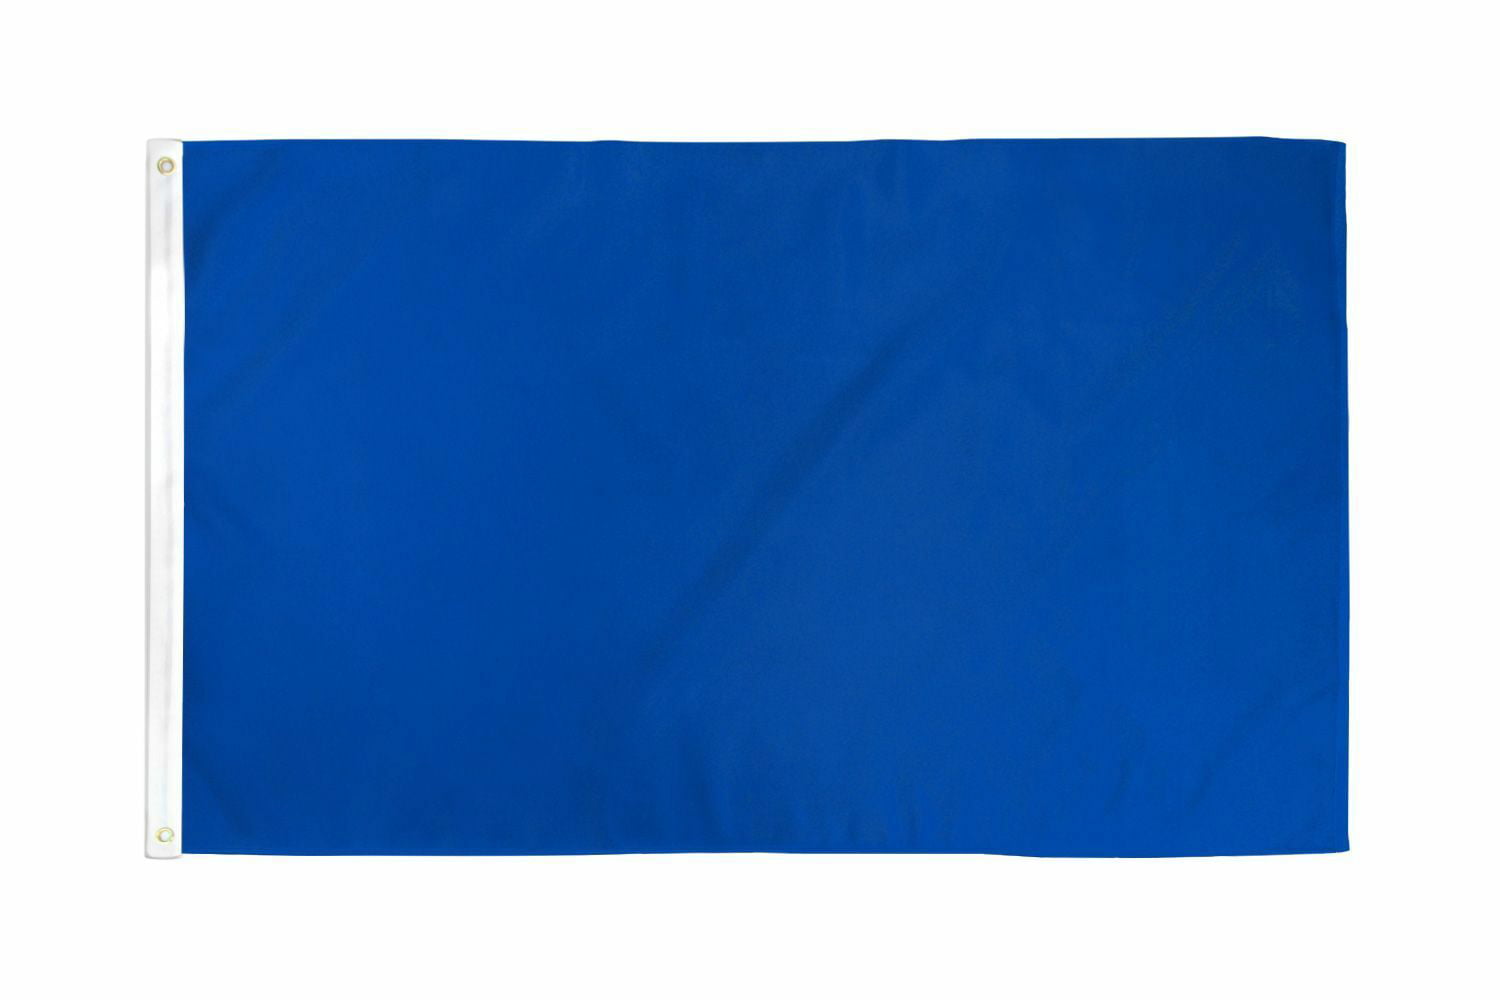 FI 2x3 Royal Blue Solid Color 210D 2'x3' Knitted Poly Nylon DuraFlag Banner 